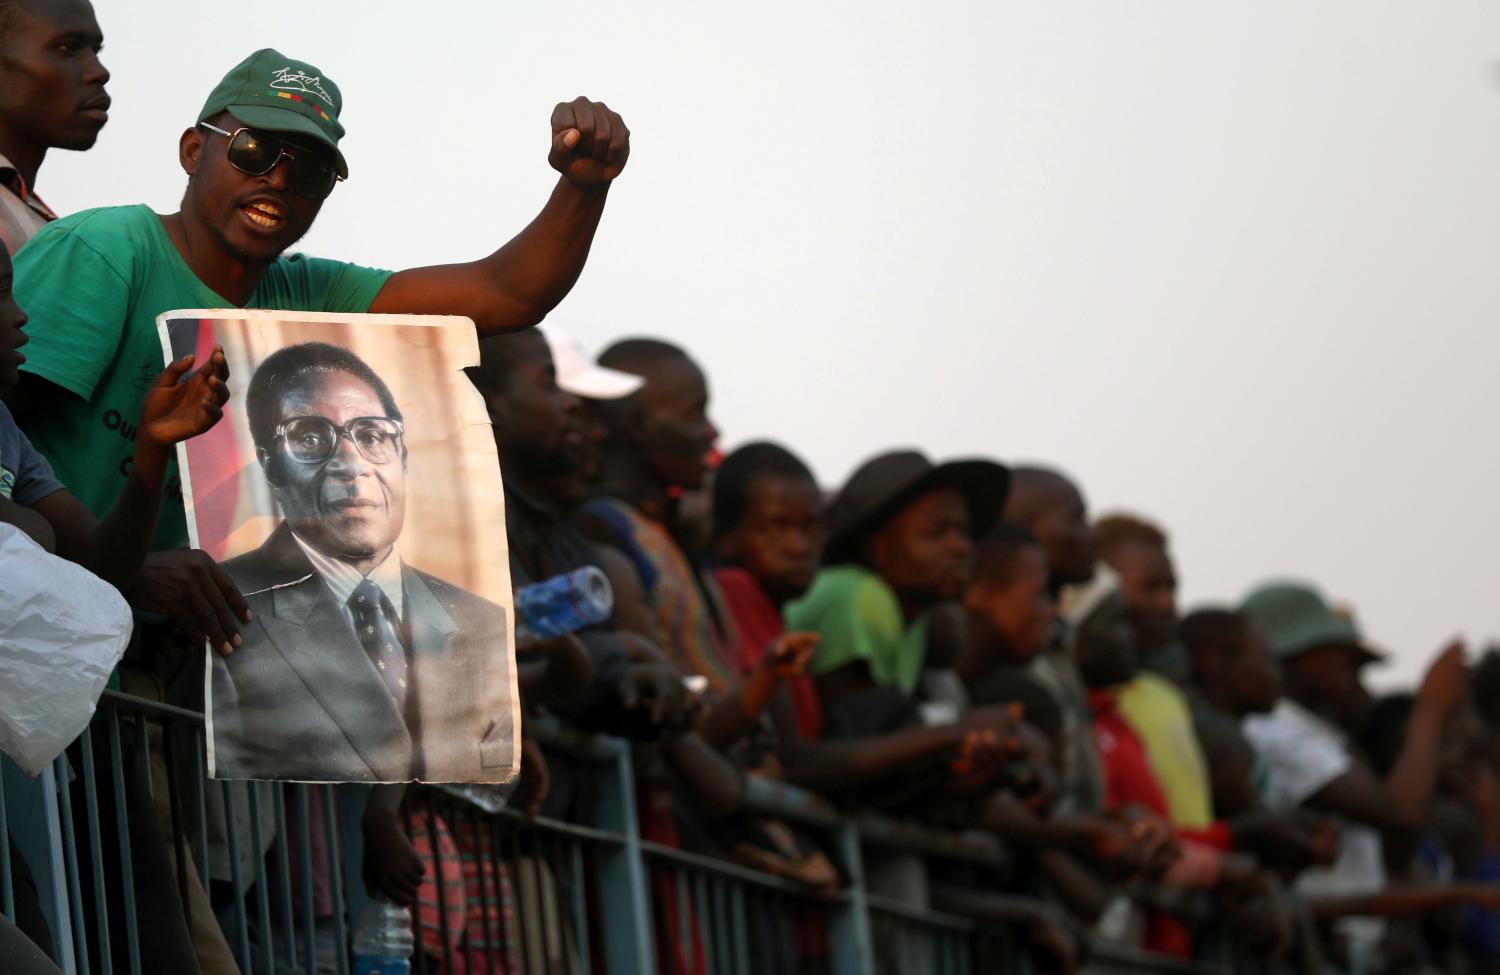 A mourner holds a poster of Robert Mugabe during the viewing of his body